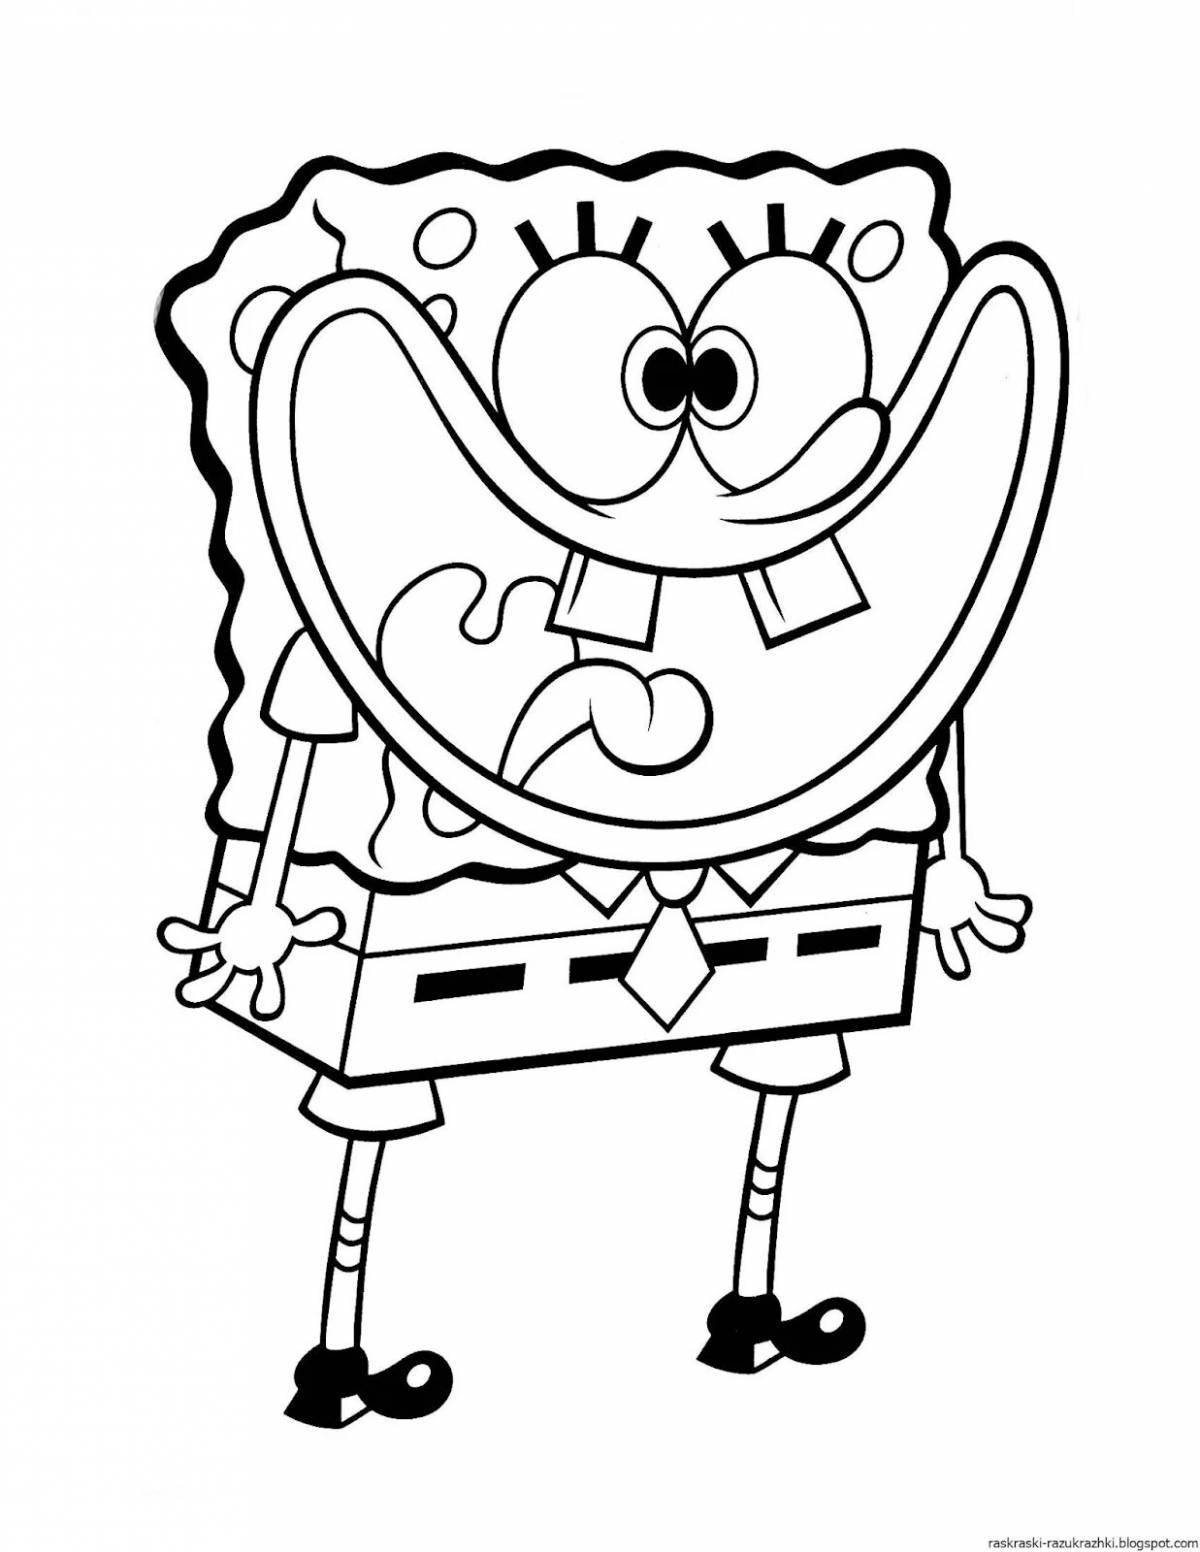 Witty spongebob coloring book for boys